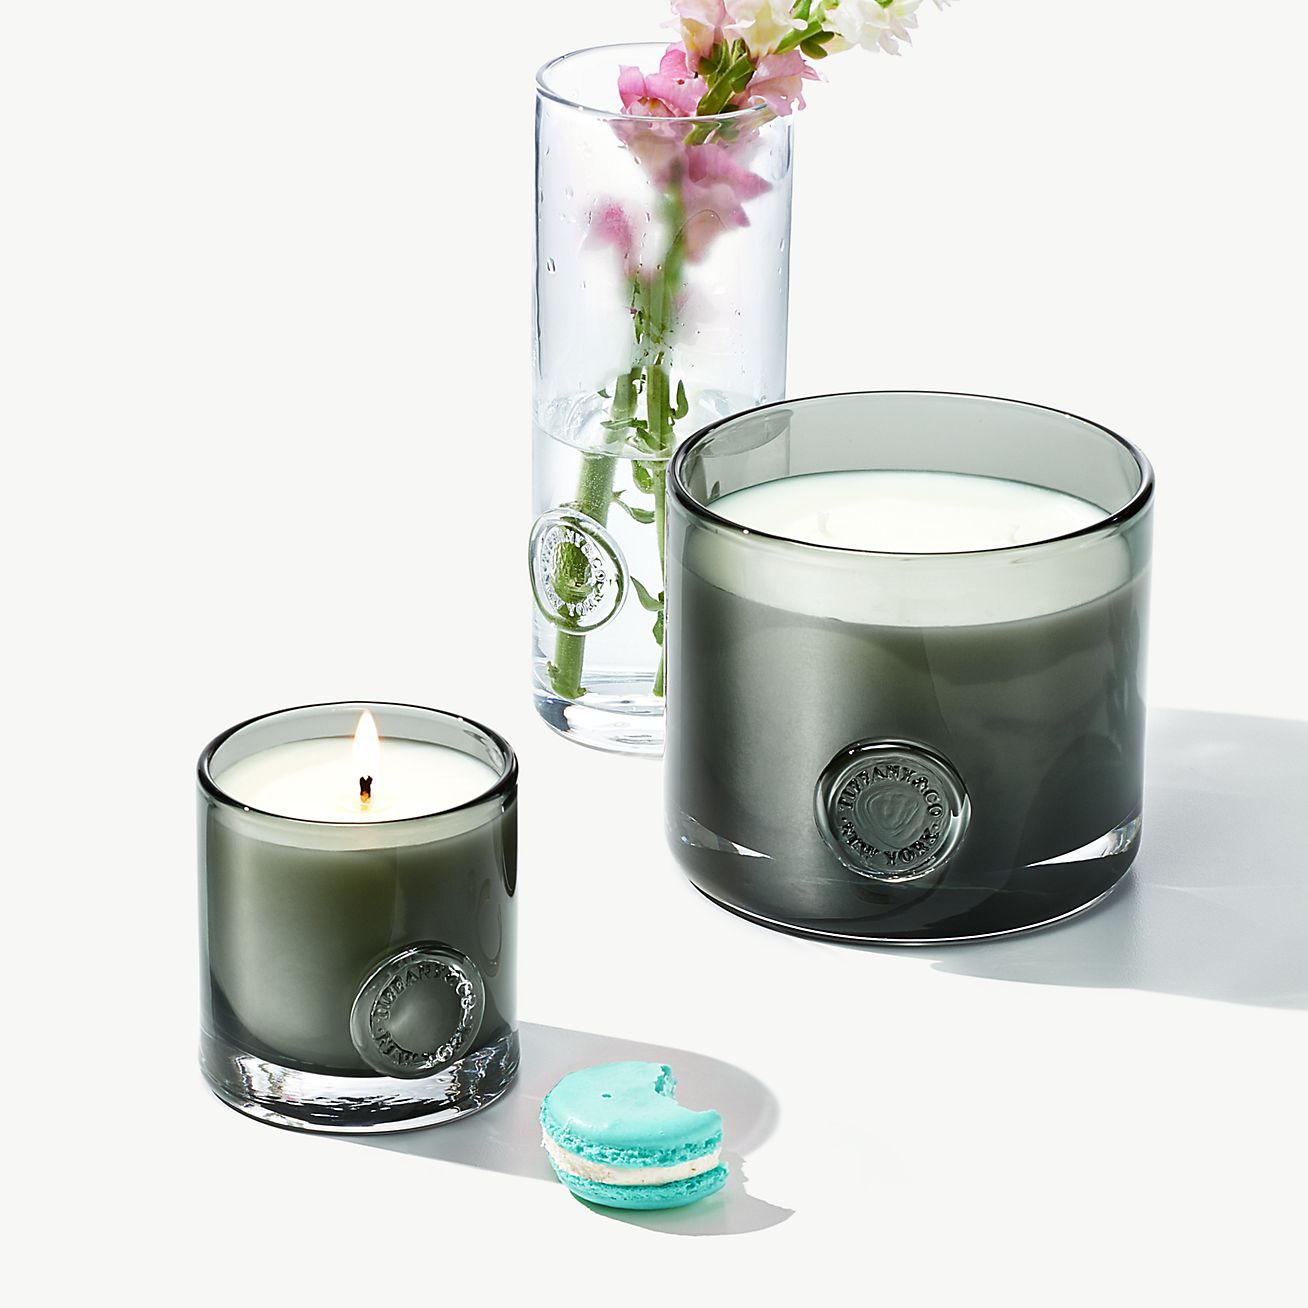 Tiffany Seal candle in a gray mouth 